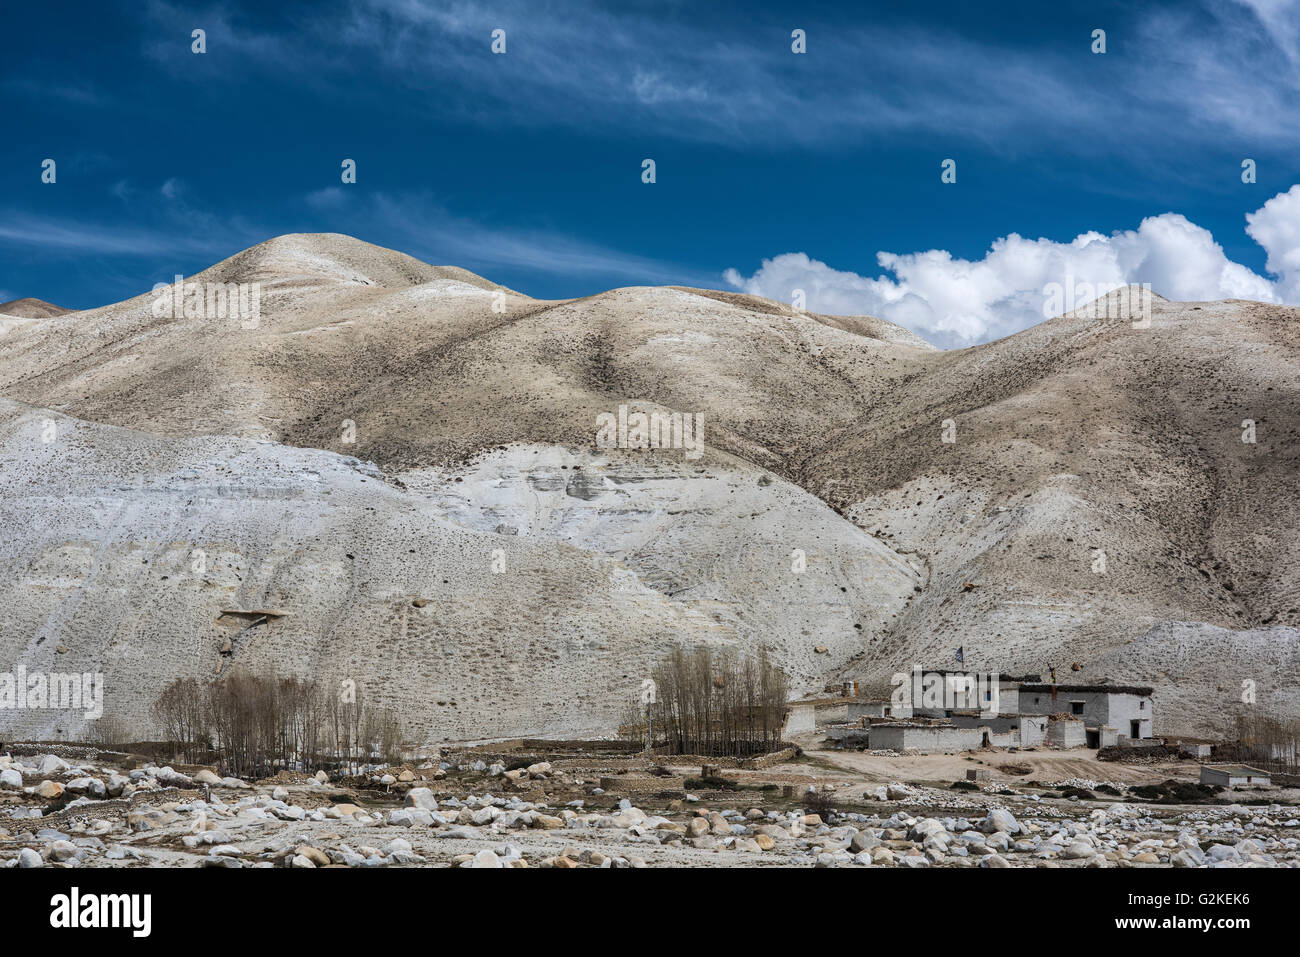 Barren mountain landscape with houses in Lo Manthang, kingdom of Mustang, Upper Mustang, Himalaya, Nepal Stock Photo